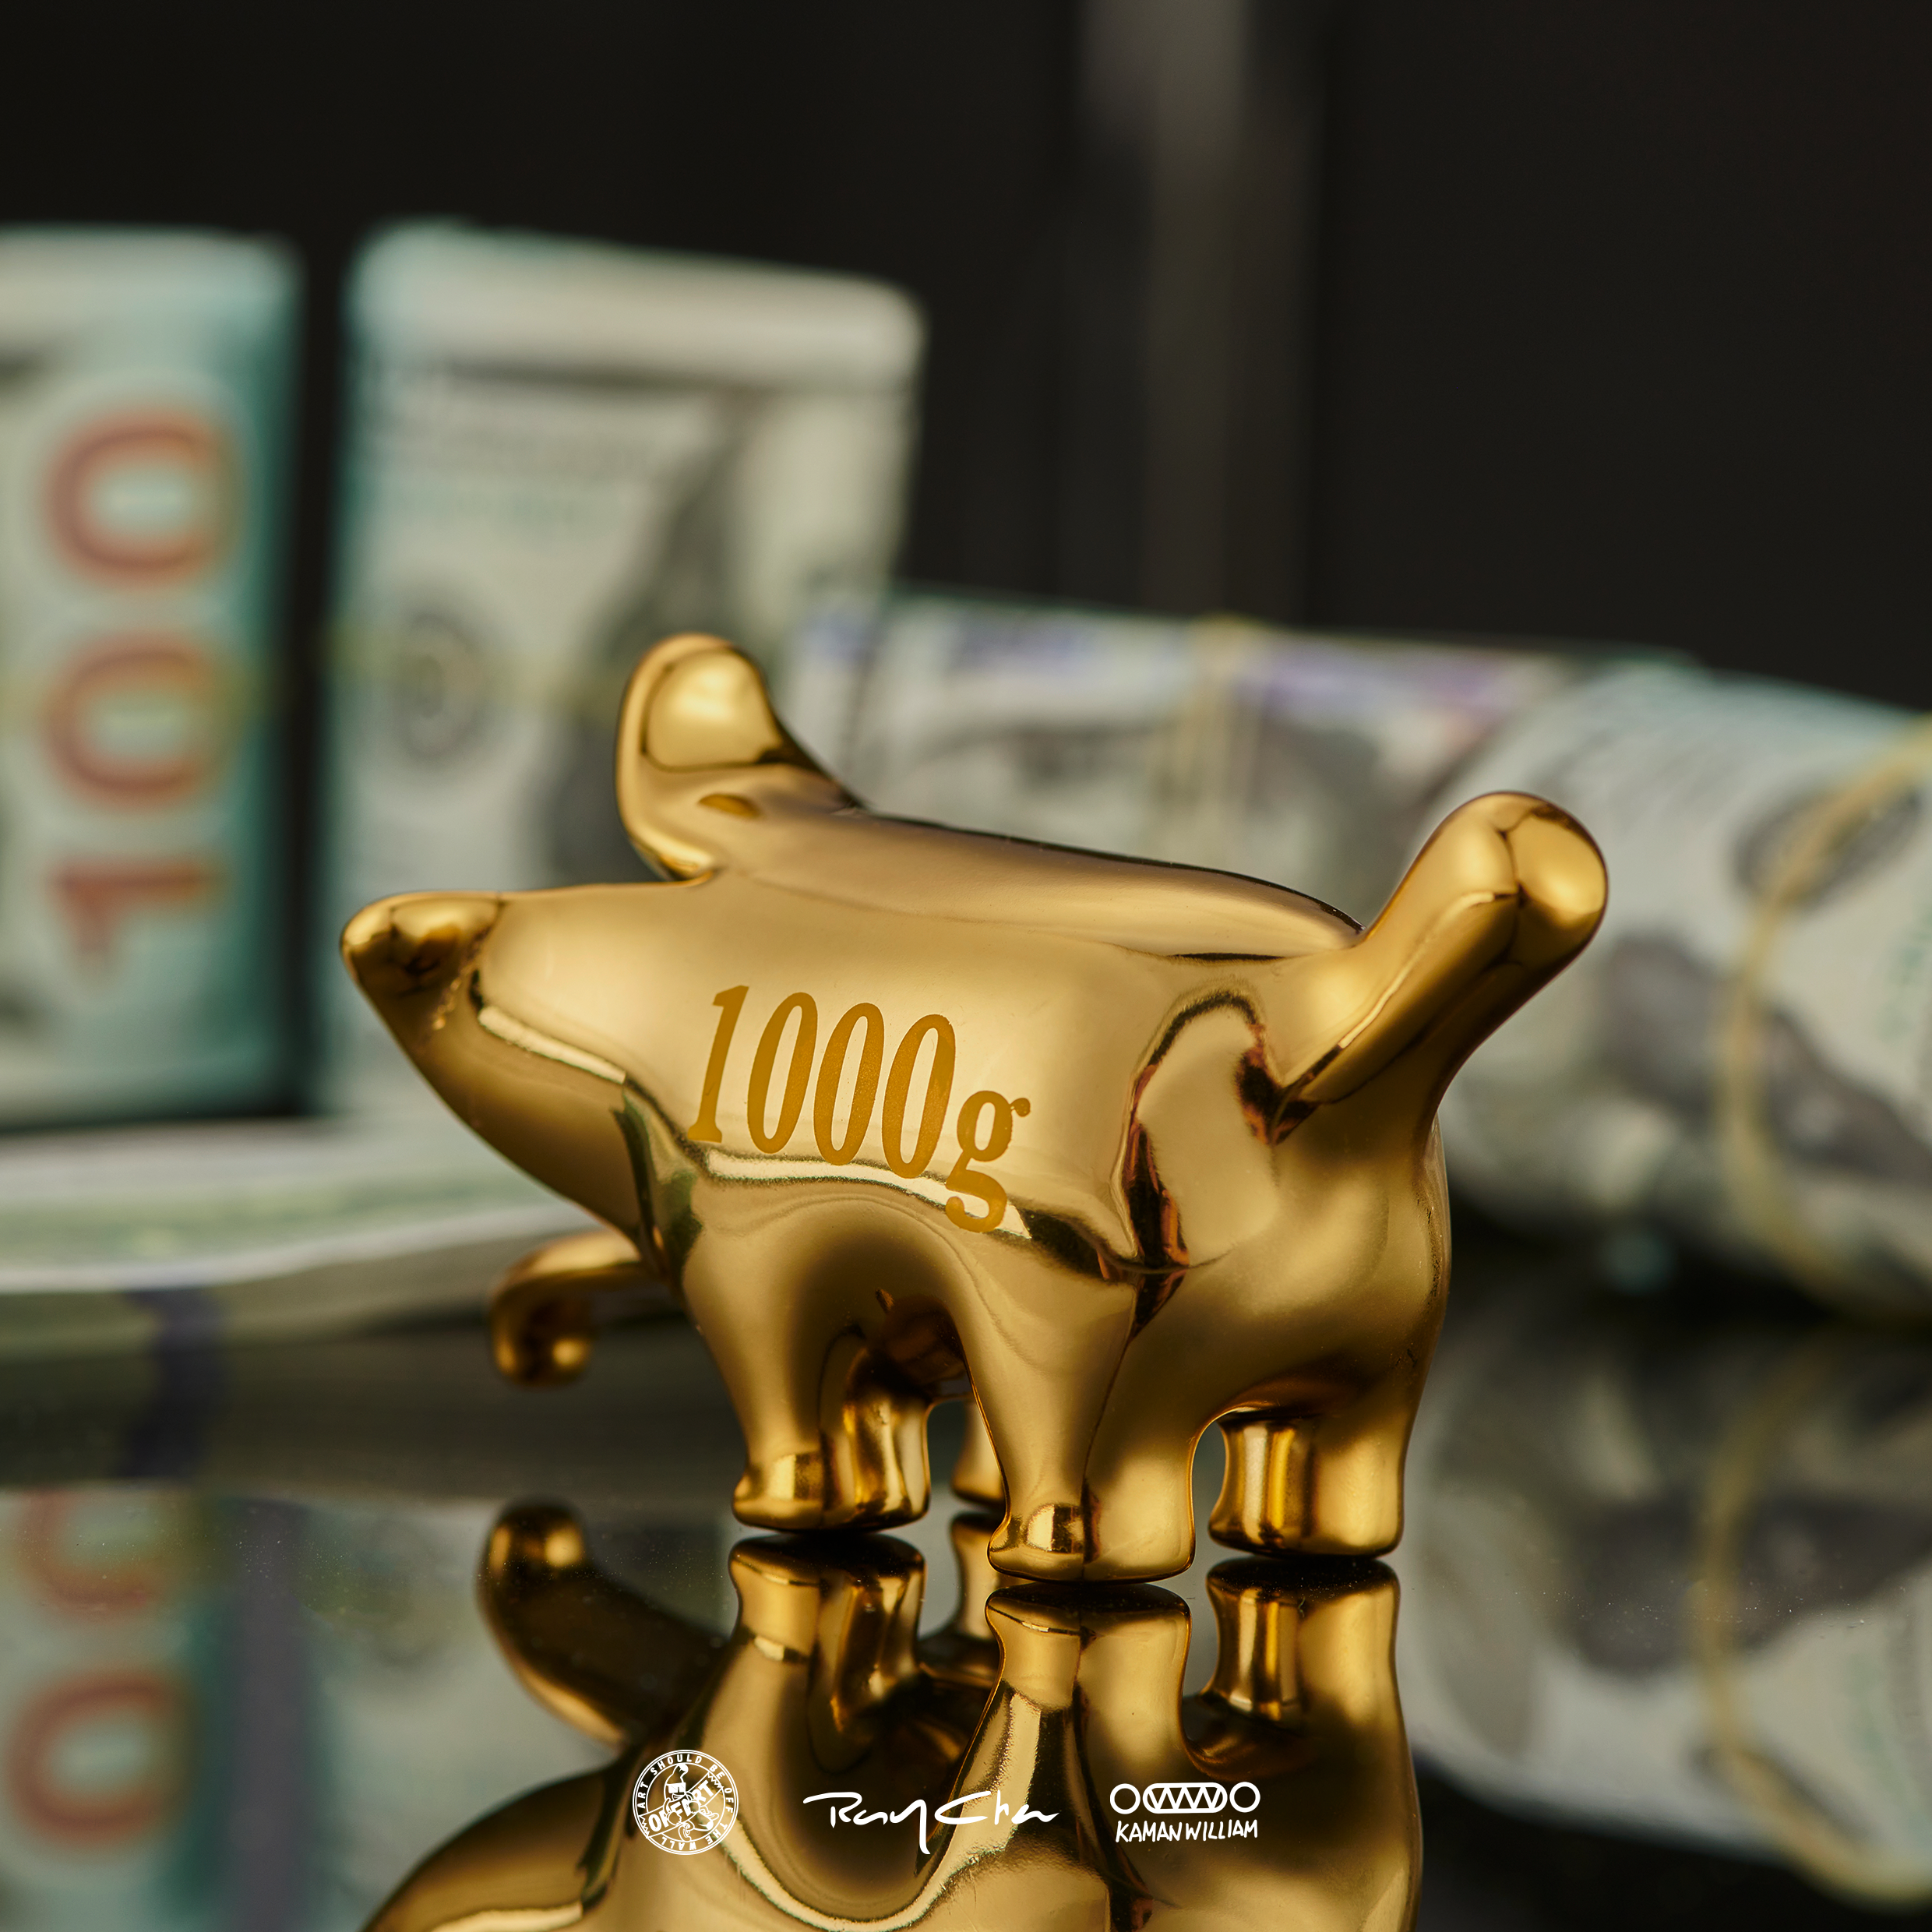 Alt text: OFFART X Kamanwillam Bananaer Dog Mini Gold Edition, a brass toy statue of a dog holding a banana, featuring a magnetically detachable design.